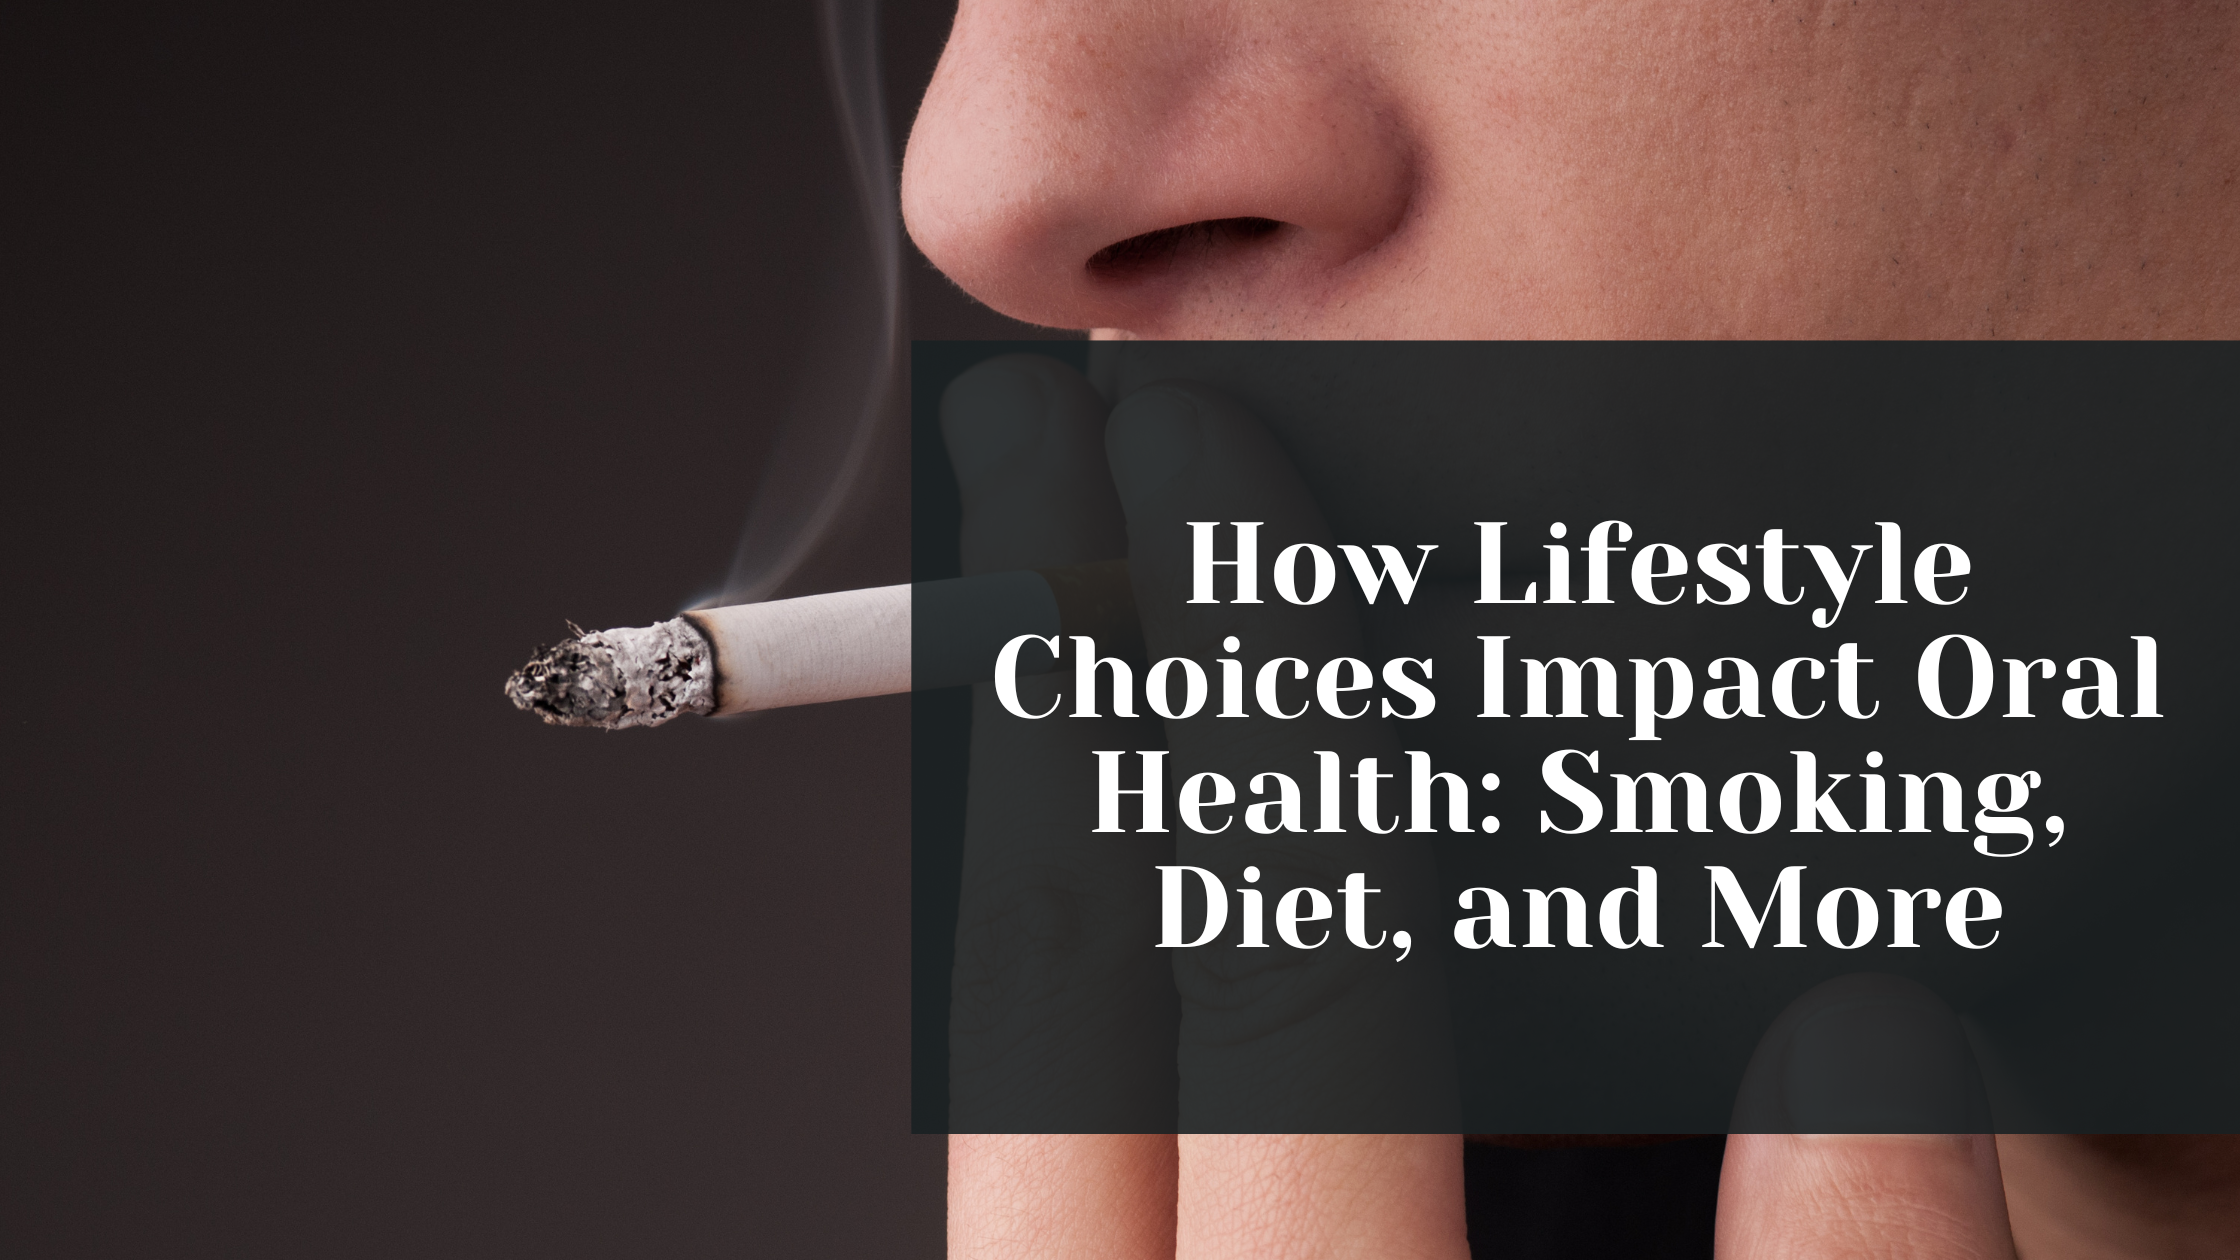 How Lifestyle Choices Impact Oral Health: Smoking, Diet, and More